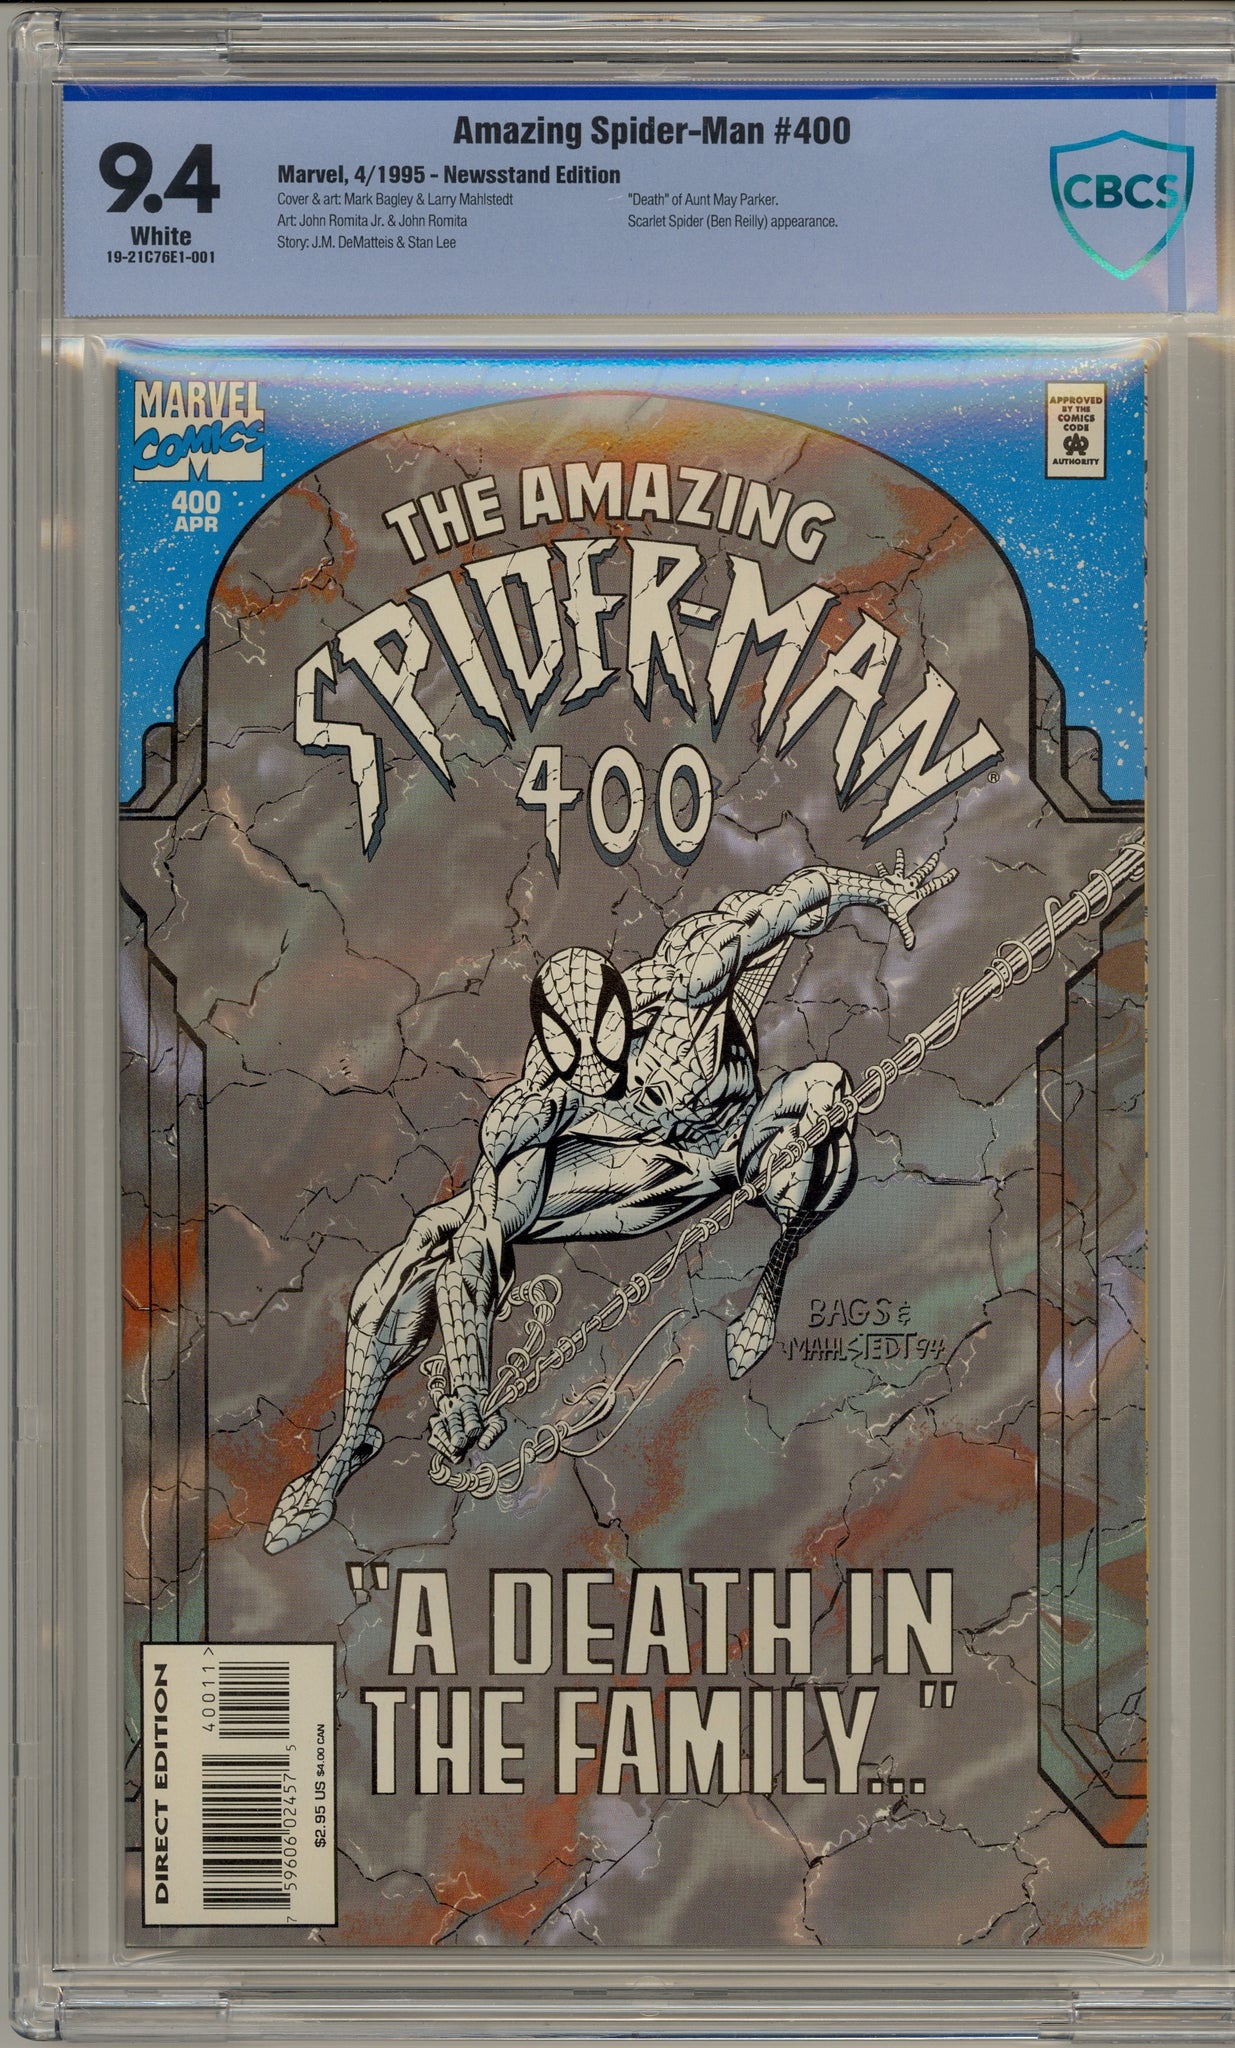 Amazing Spider-Man #400 (1995) variant cover - death of Aunt May